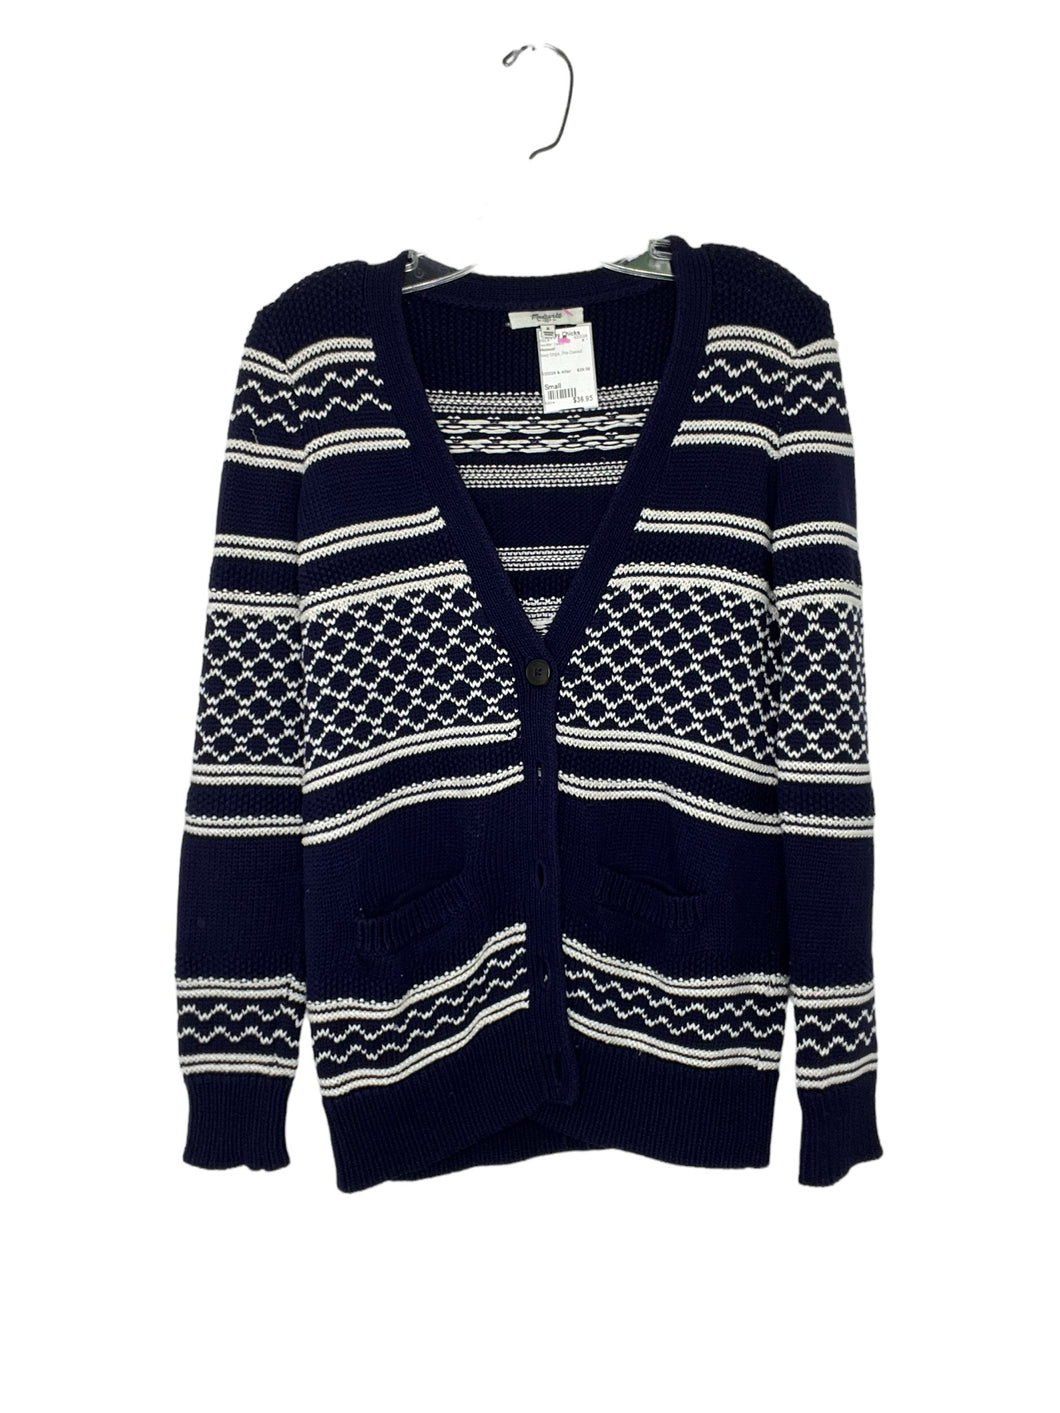 Madewell Size Small Navy Stripe Sweater- Ladies